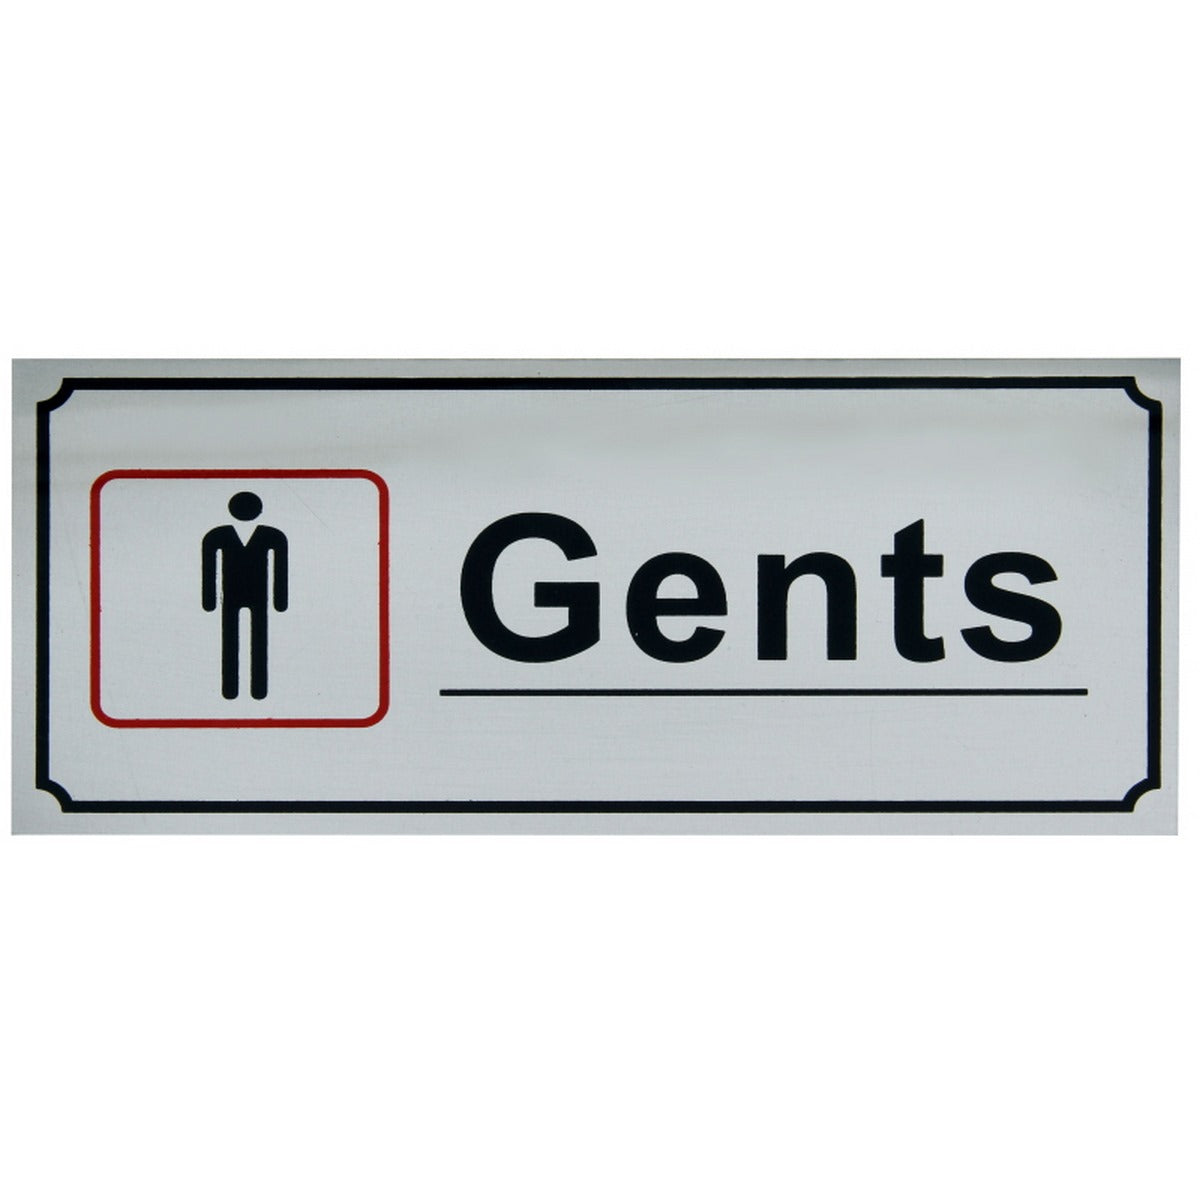 Gents and Ladies Toilet Sign Template | PosterMyWall